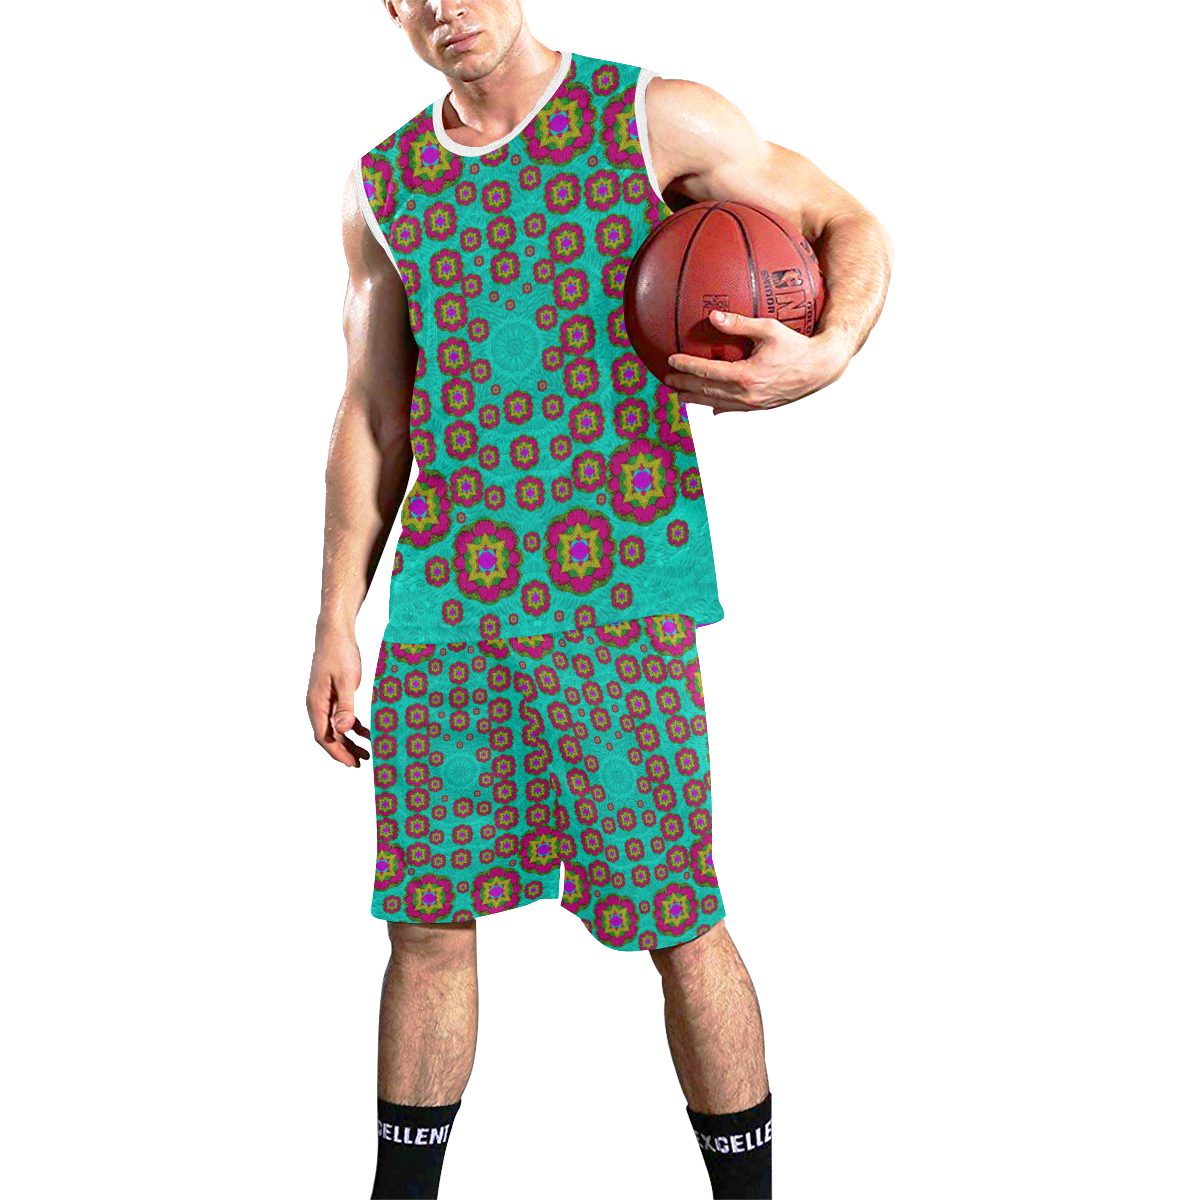 The worlds most beautiful flower shower on the sky All Over Print Basketball Uniform